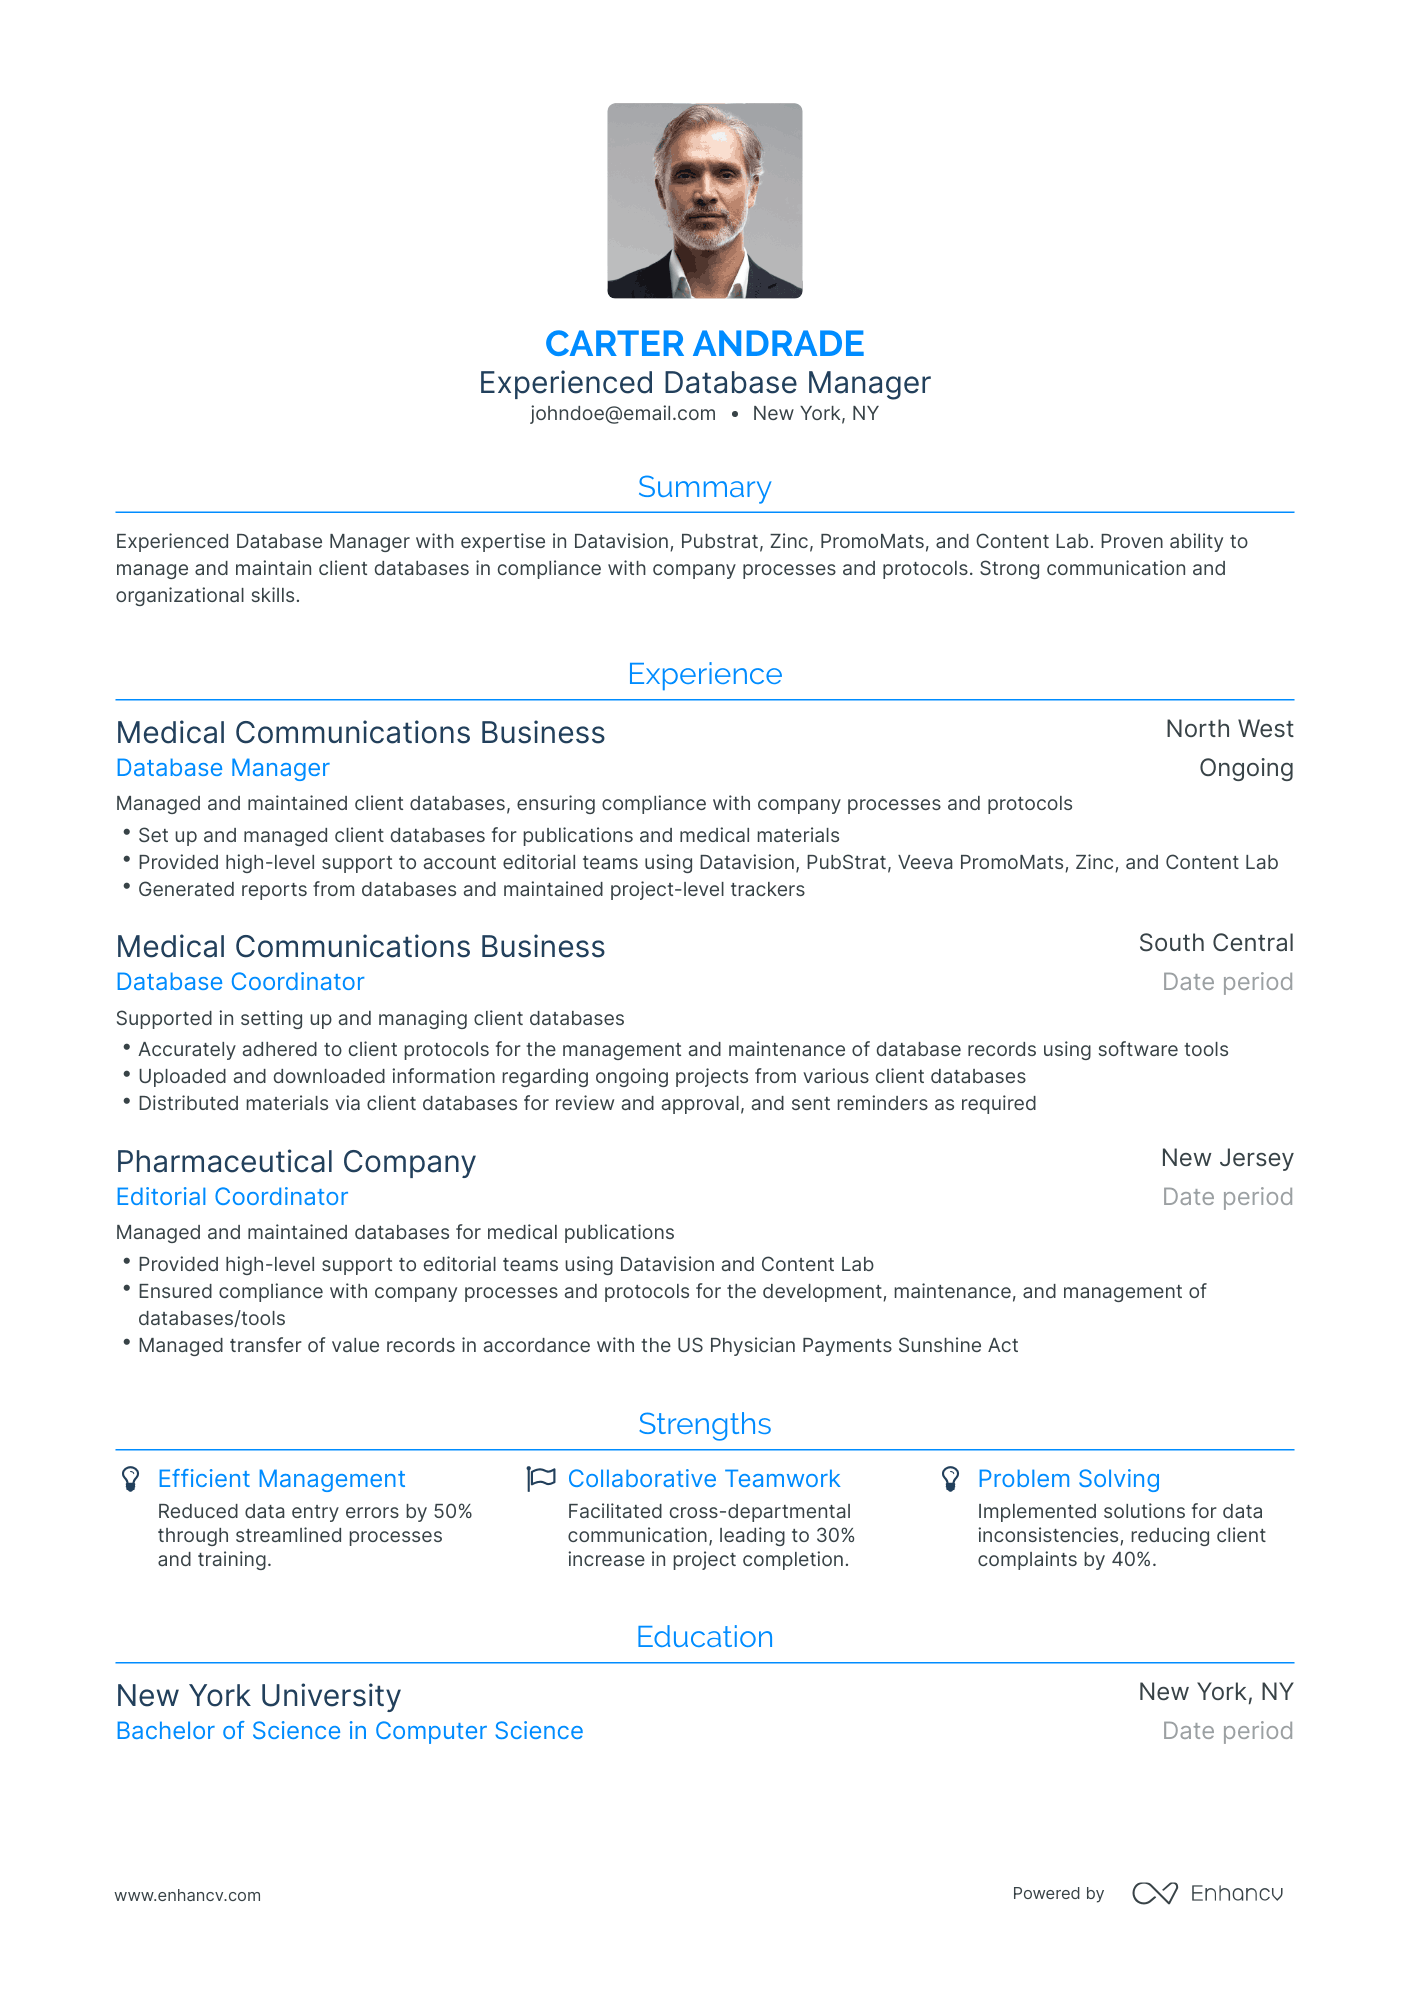 Traditional Database Manager Resume Template